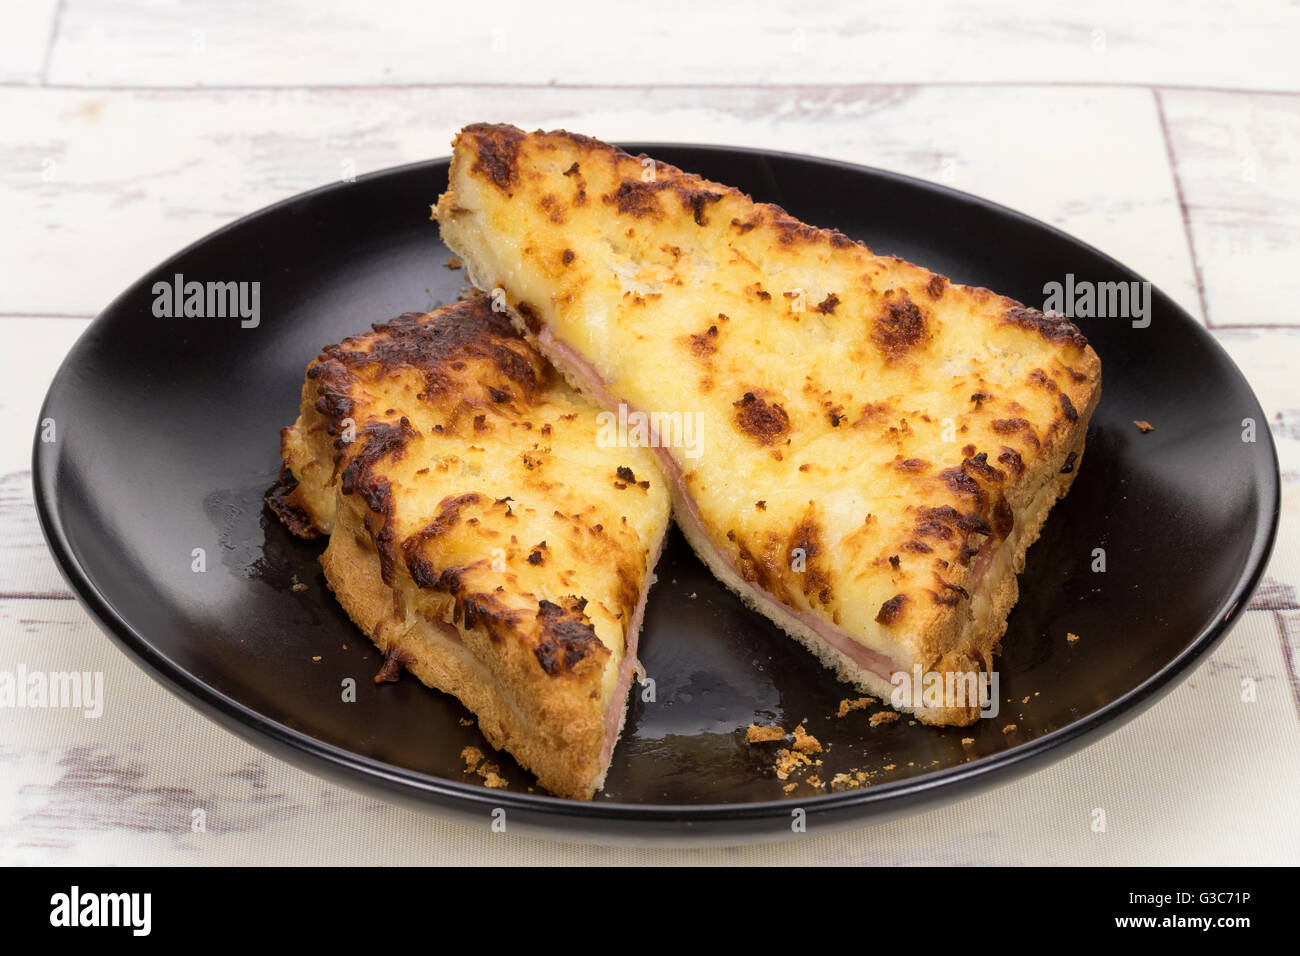 A delicious toasted cheese and ham panini croque monsieur sandwich Stock Photo